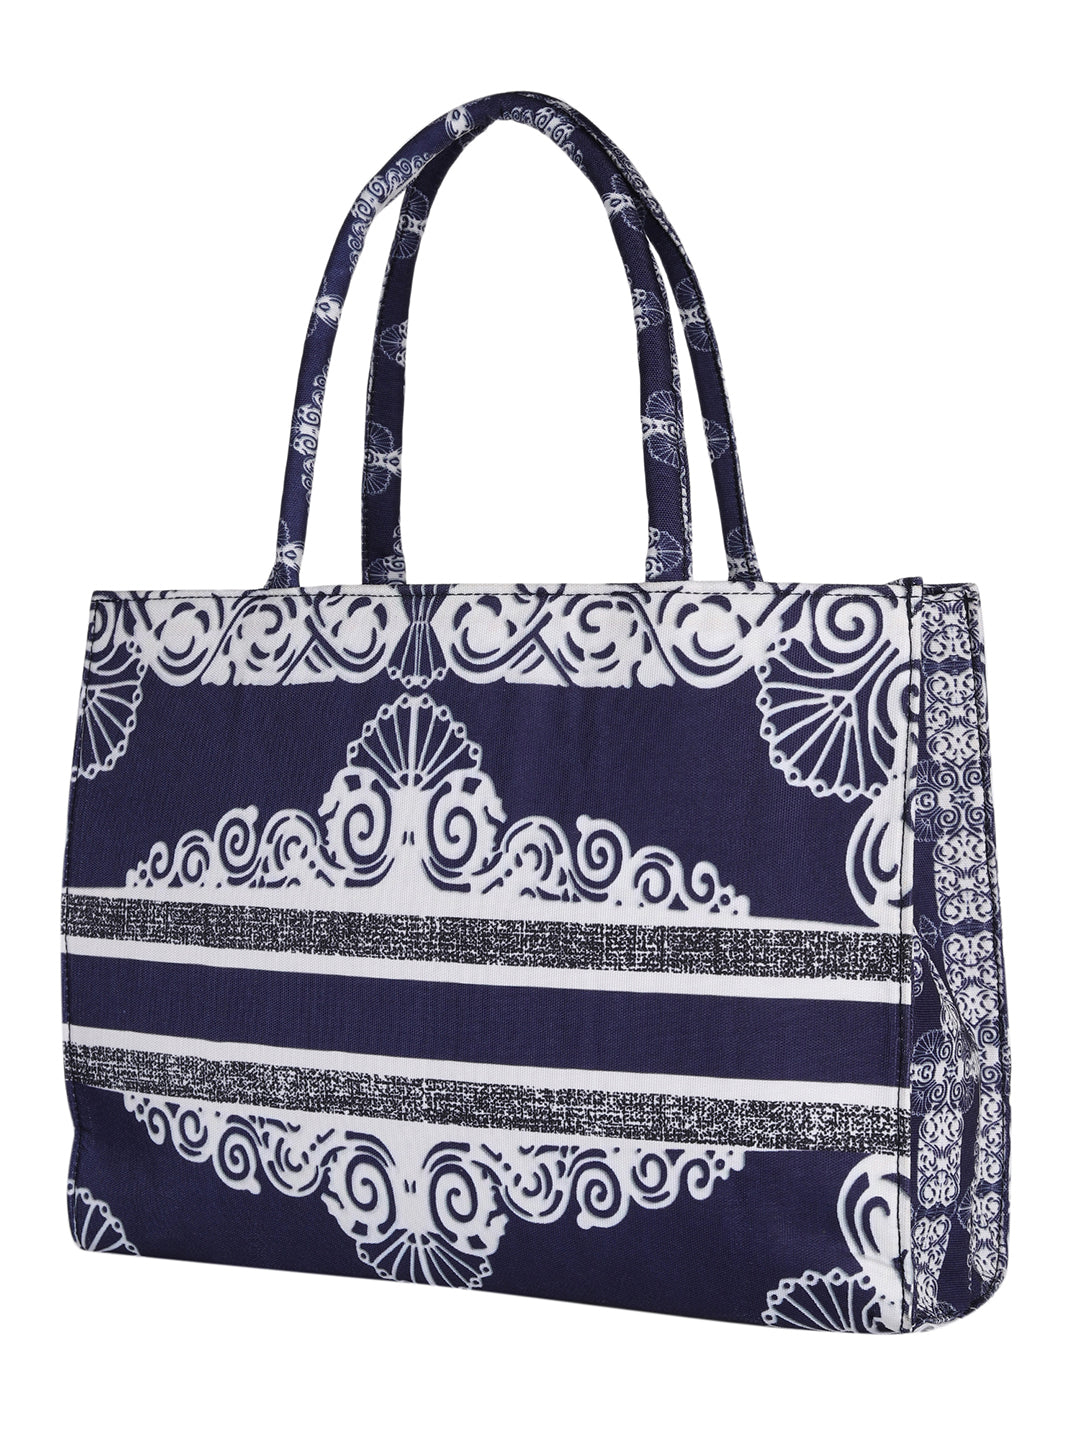 Women's Graphic Printed Canvas Tote Bag(MWCUS023)